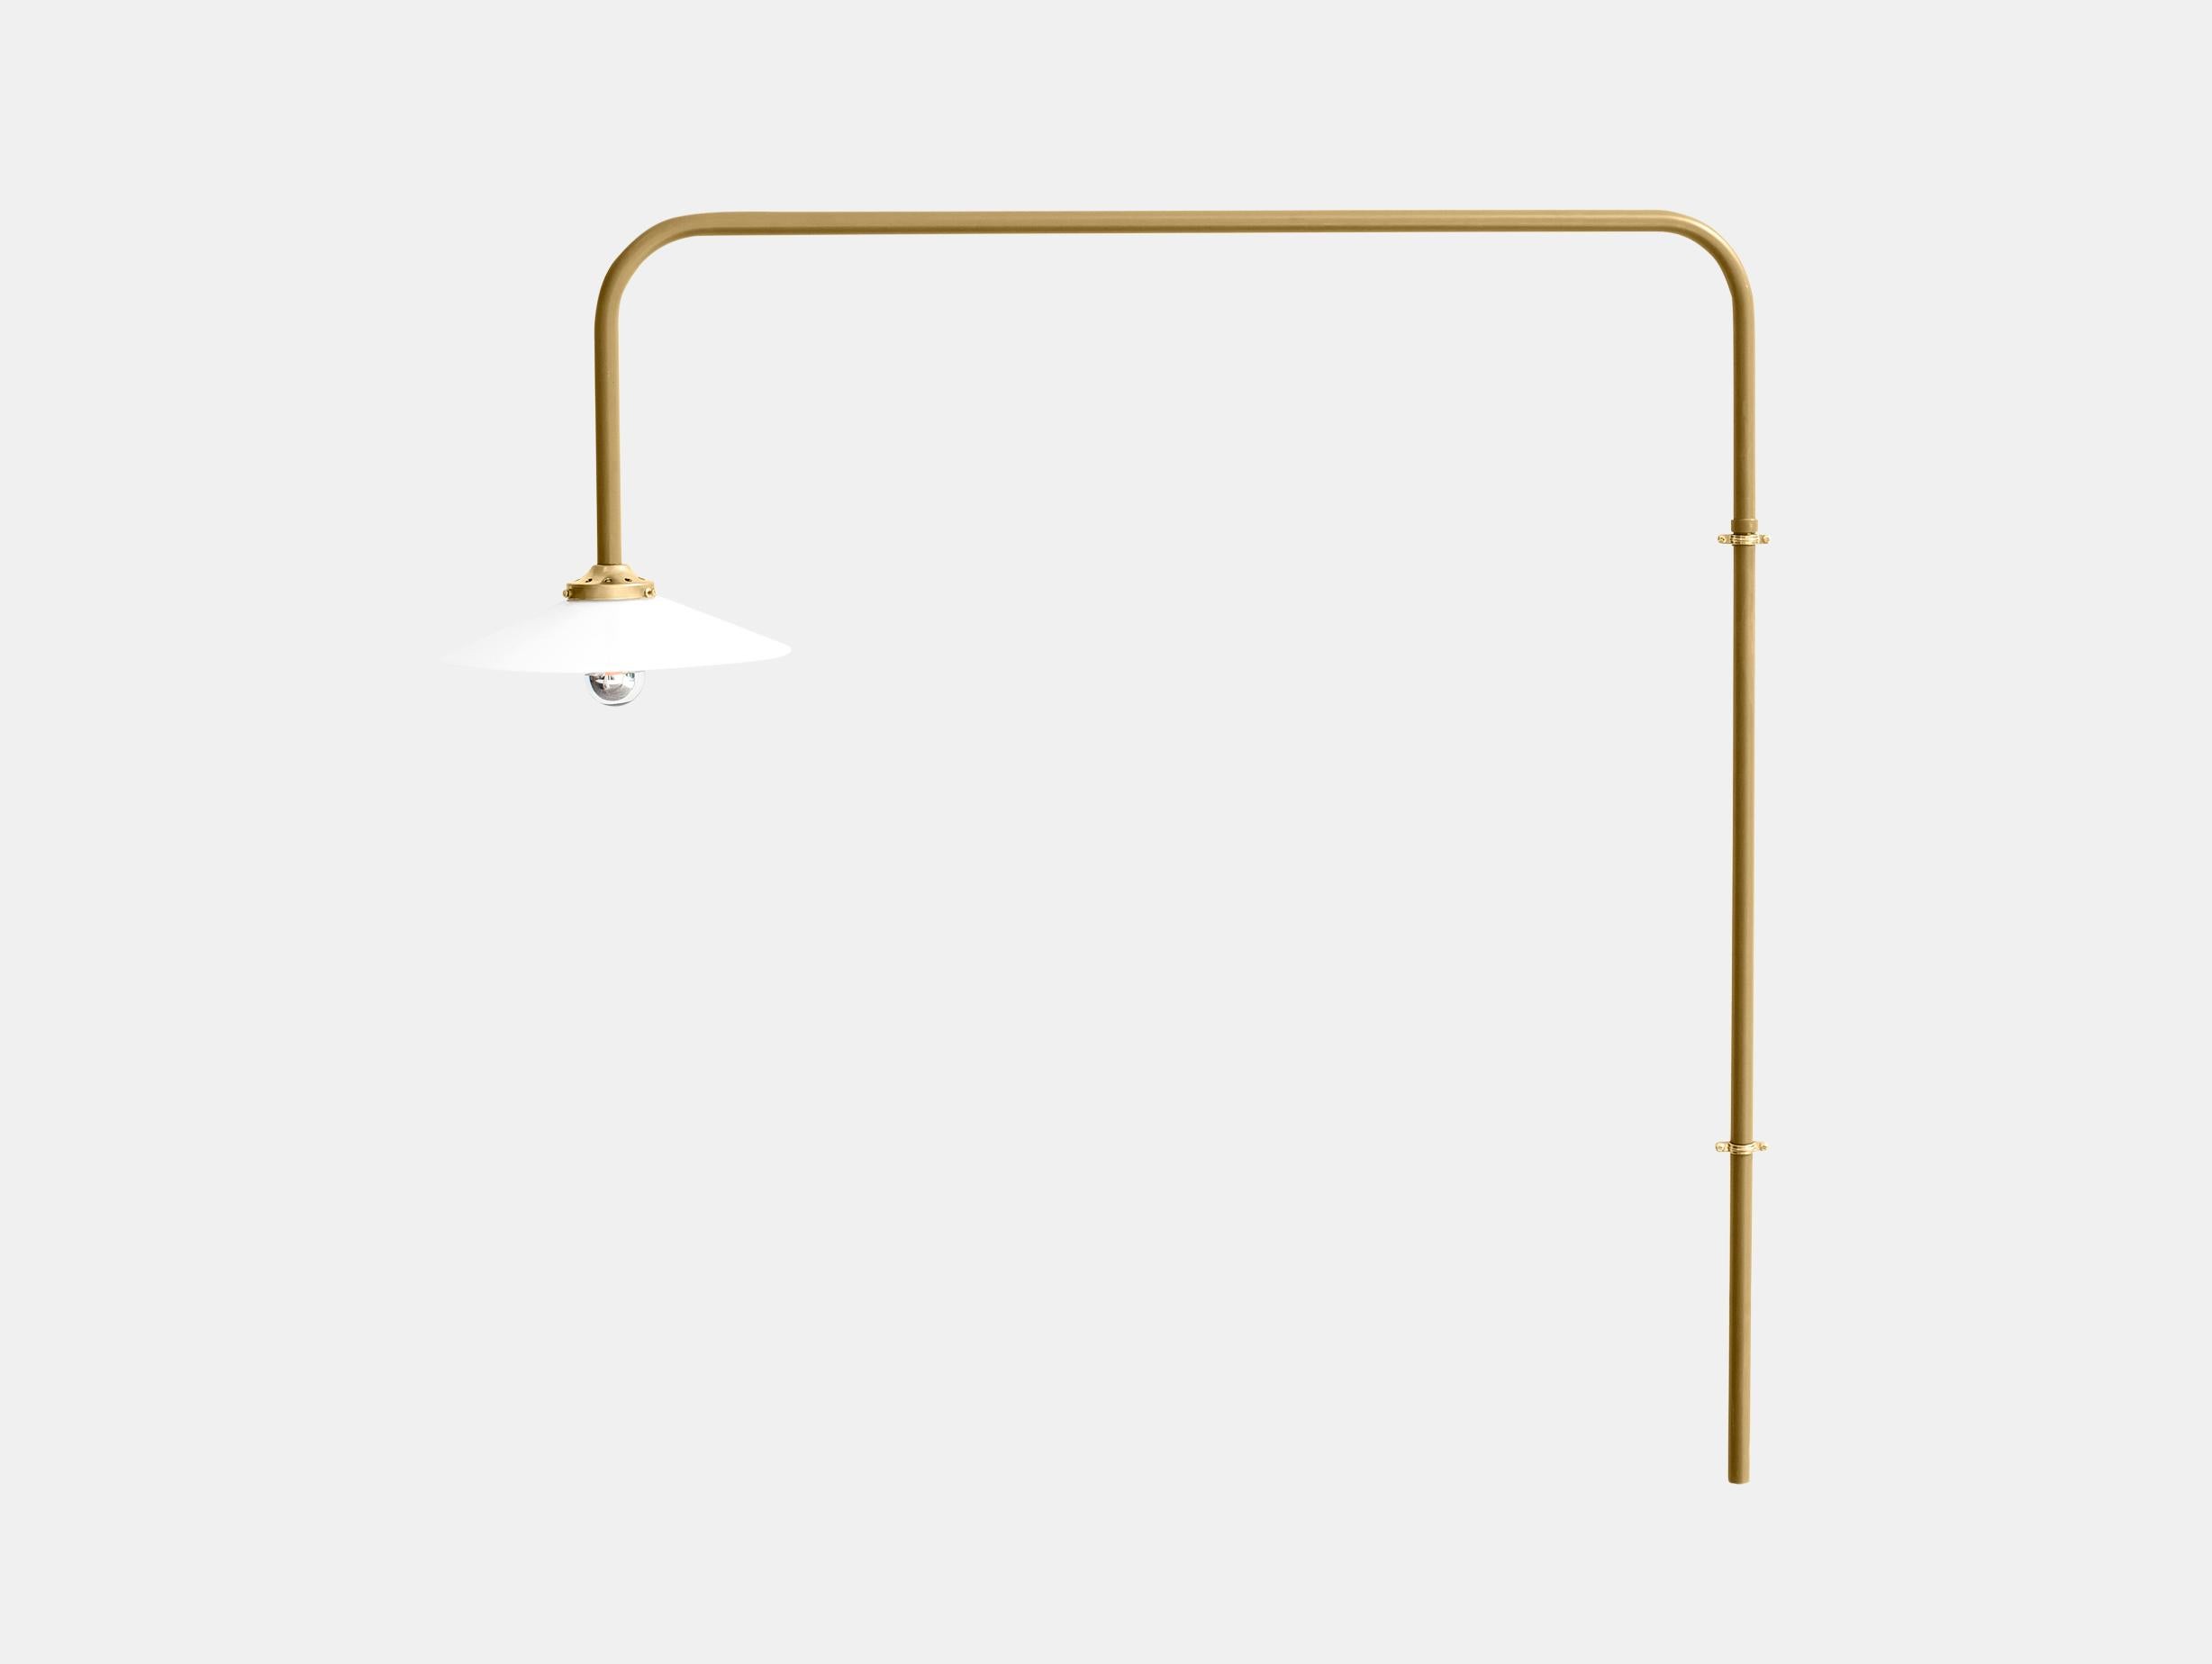 Wall lamp model “nº5”
Manufactured by Valerie Objects
Belgium, 2015
Painted metal frame (brass finish also available, please contact us for pricing)
Open edition

Measurements
100 cm x 90 cm
39.4 in x 35.4 inch

Concept
Our objects reflect our deep